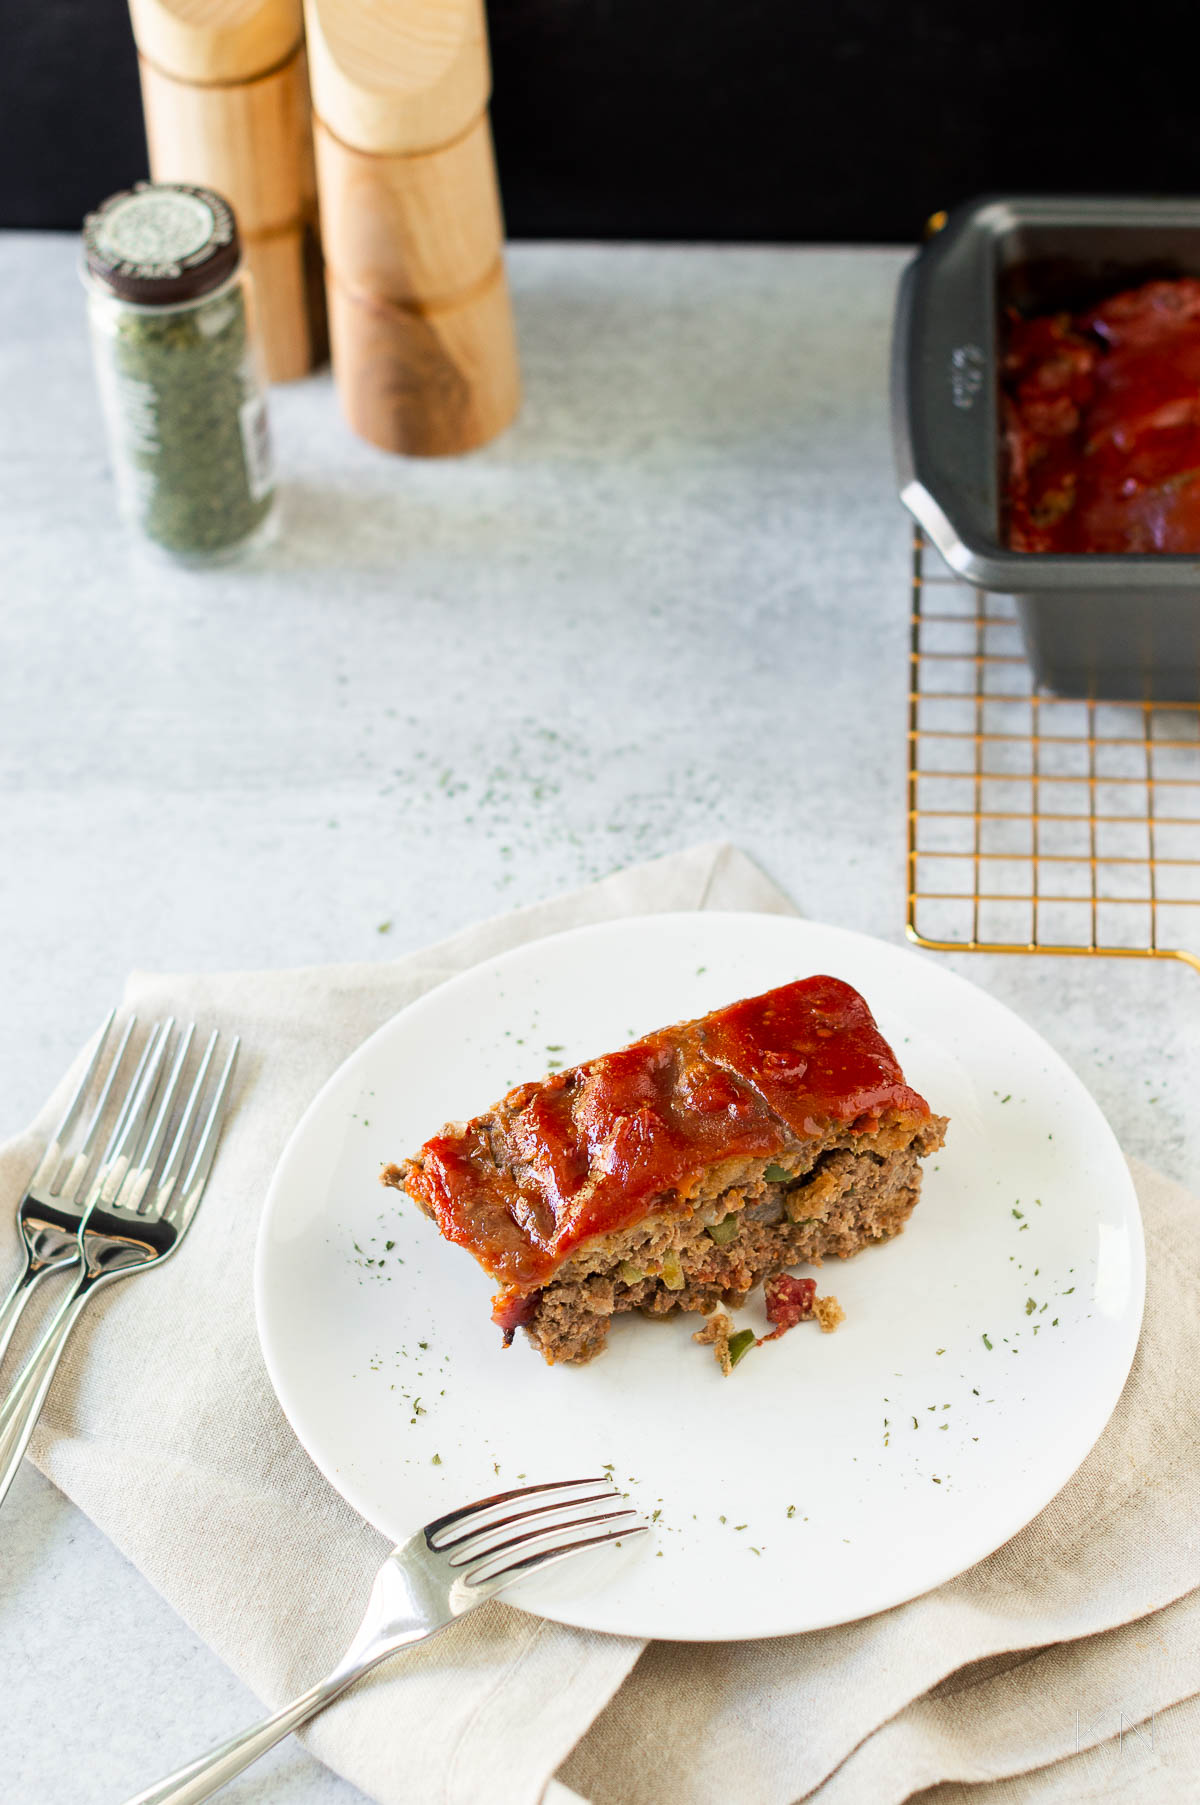 Easy Weeknight Dinner Idea: Delicious, Savory Meatloaf